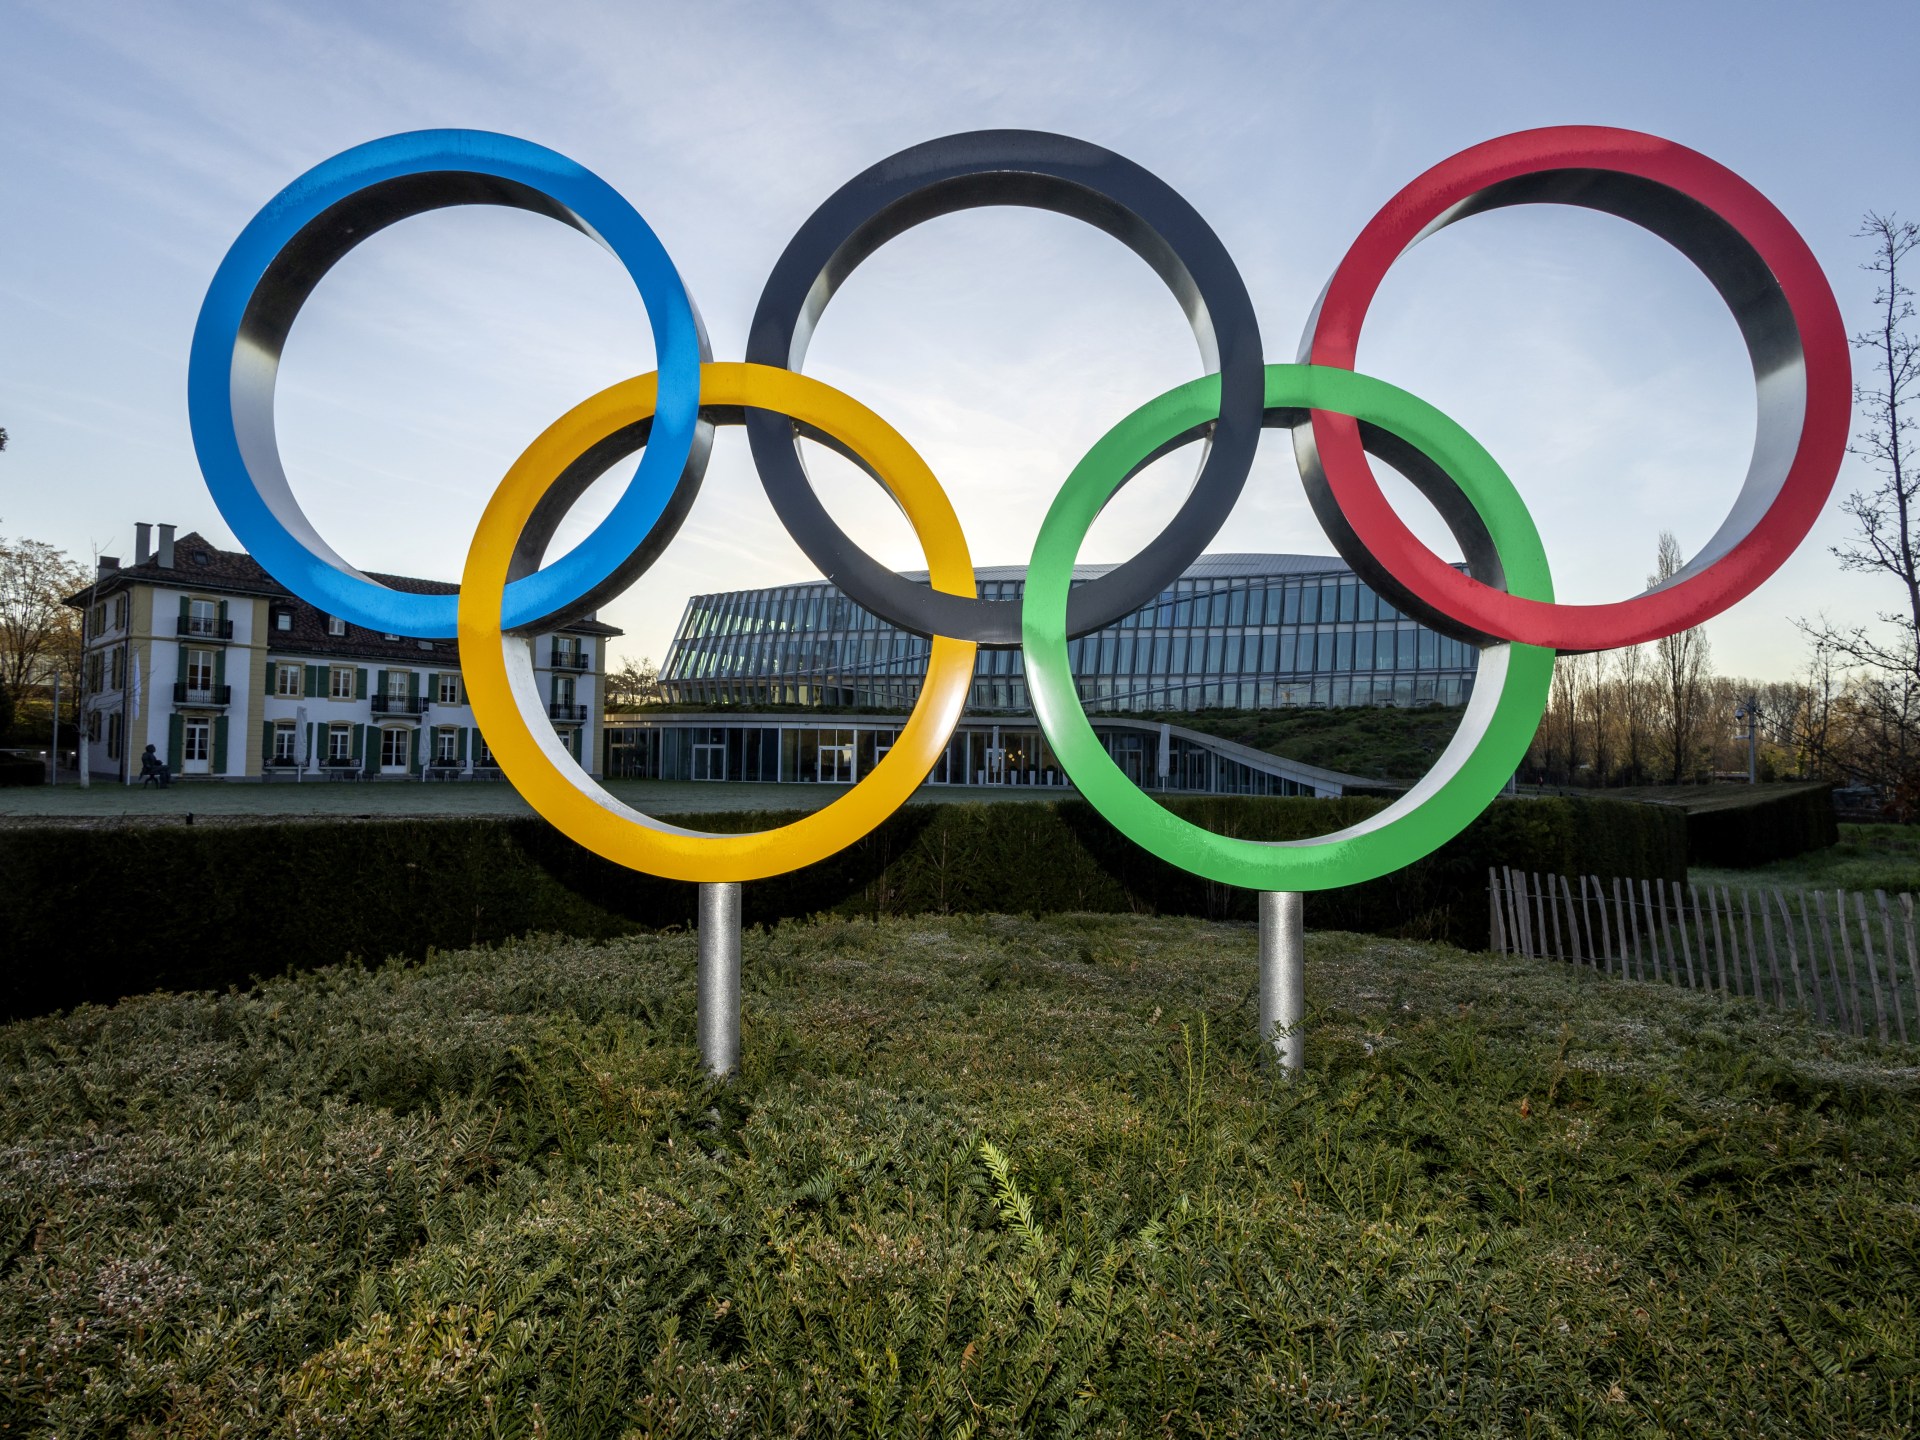 IOC’s stance on Russia could ‘bury Olympic movement’, Putin says | Olympics News #IOCs #stance #Russia #bury #Olympic #movement #Putin #Olympics #News